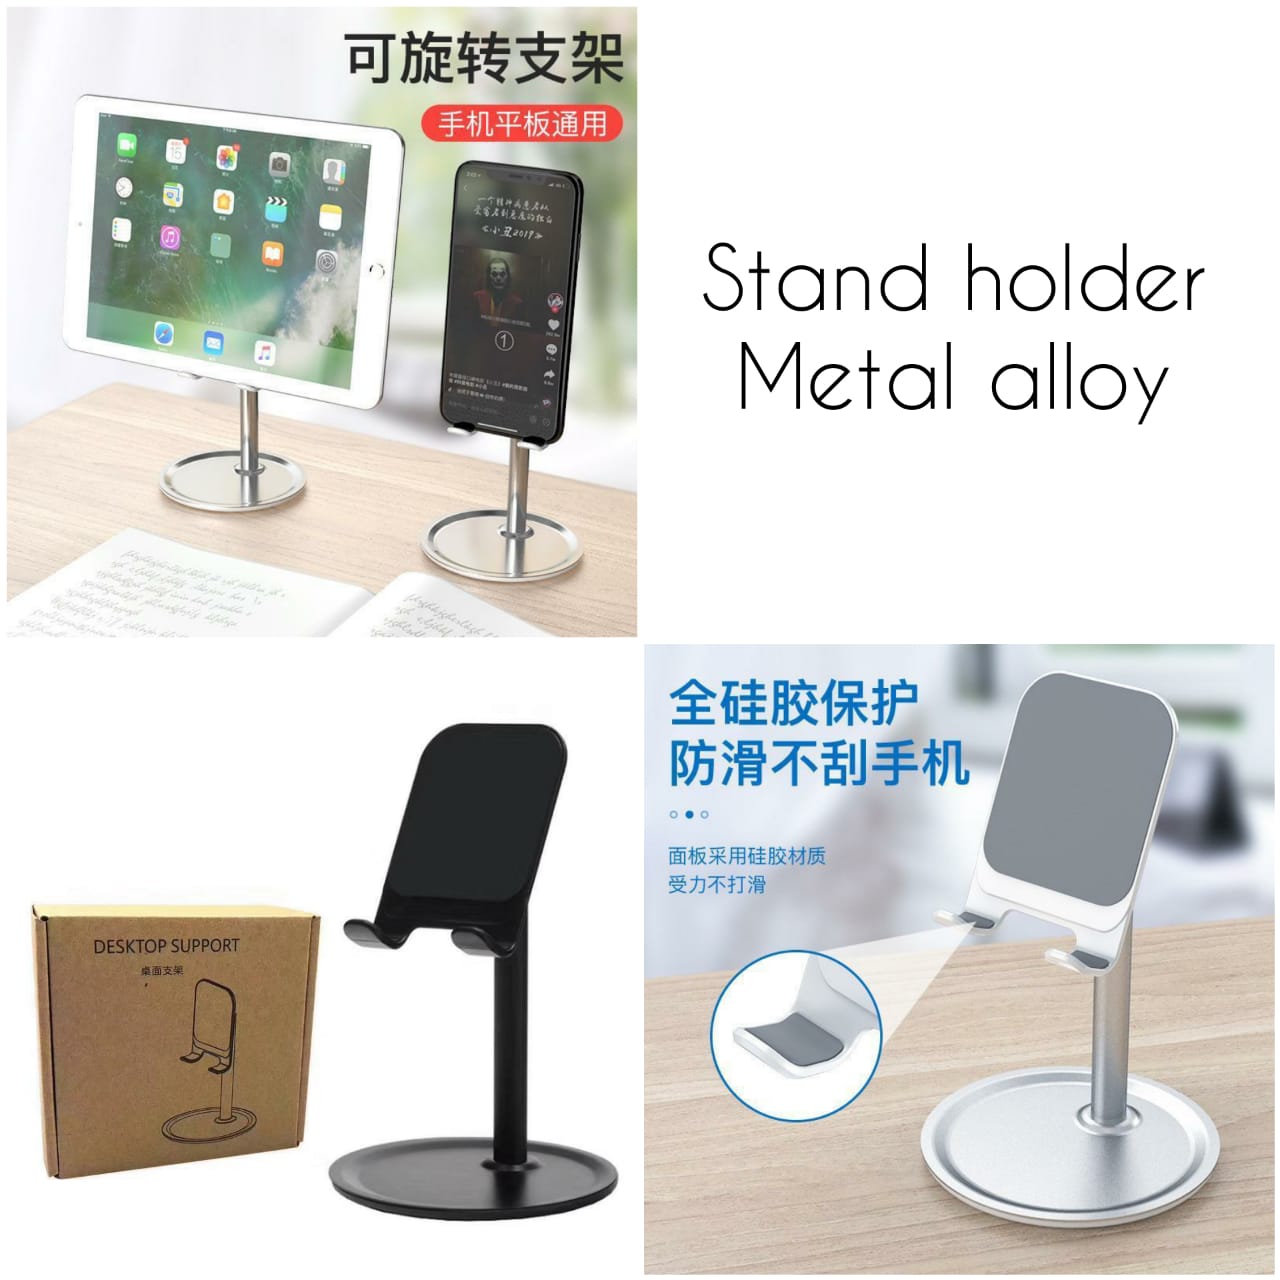 STAND HOLDER METAL ALLOY + PACKING